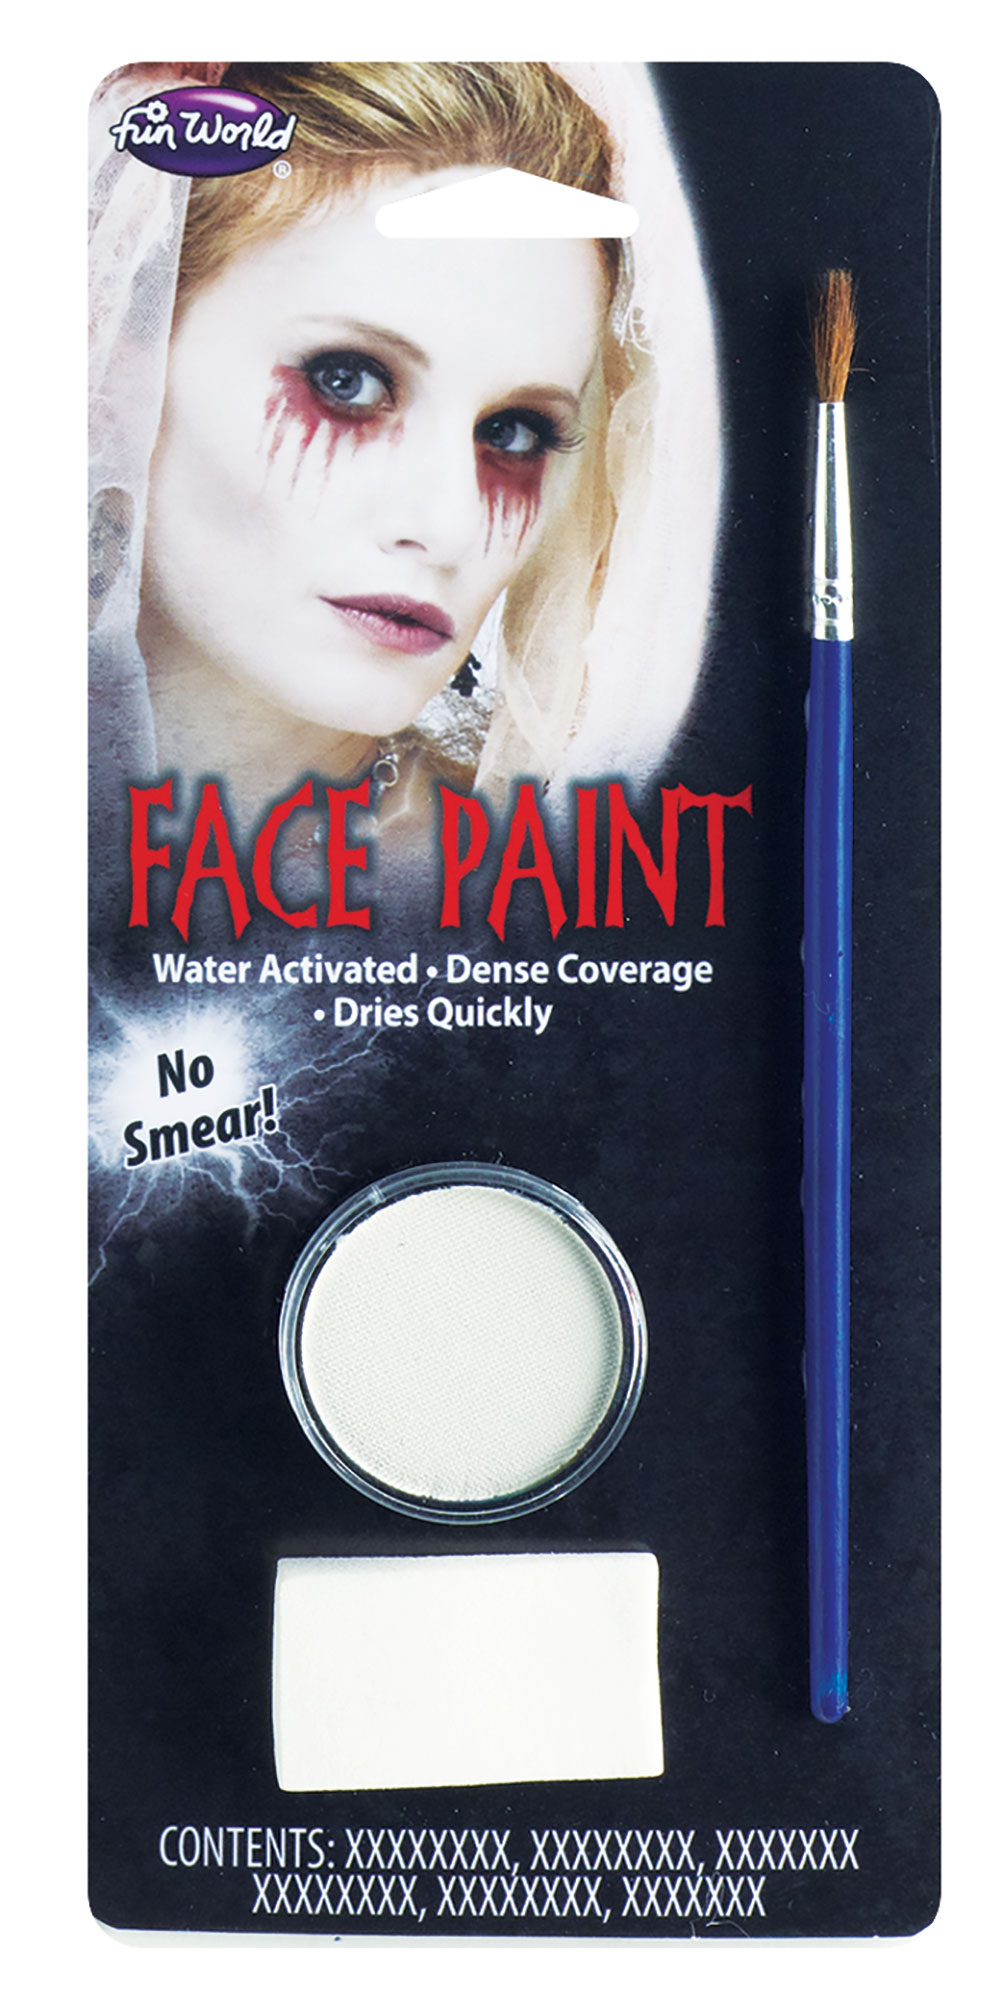 Water Activated Face Paint - Compact